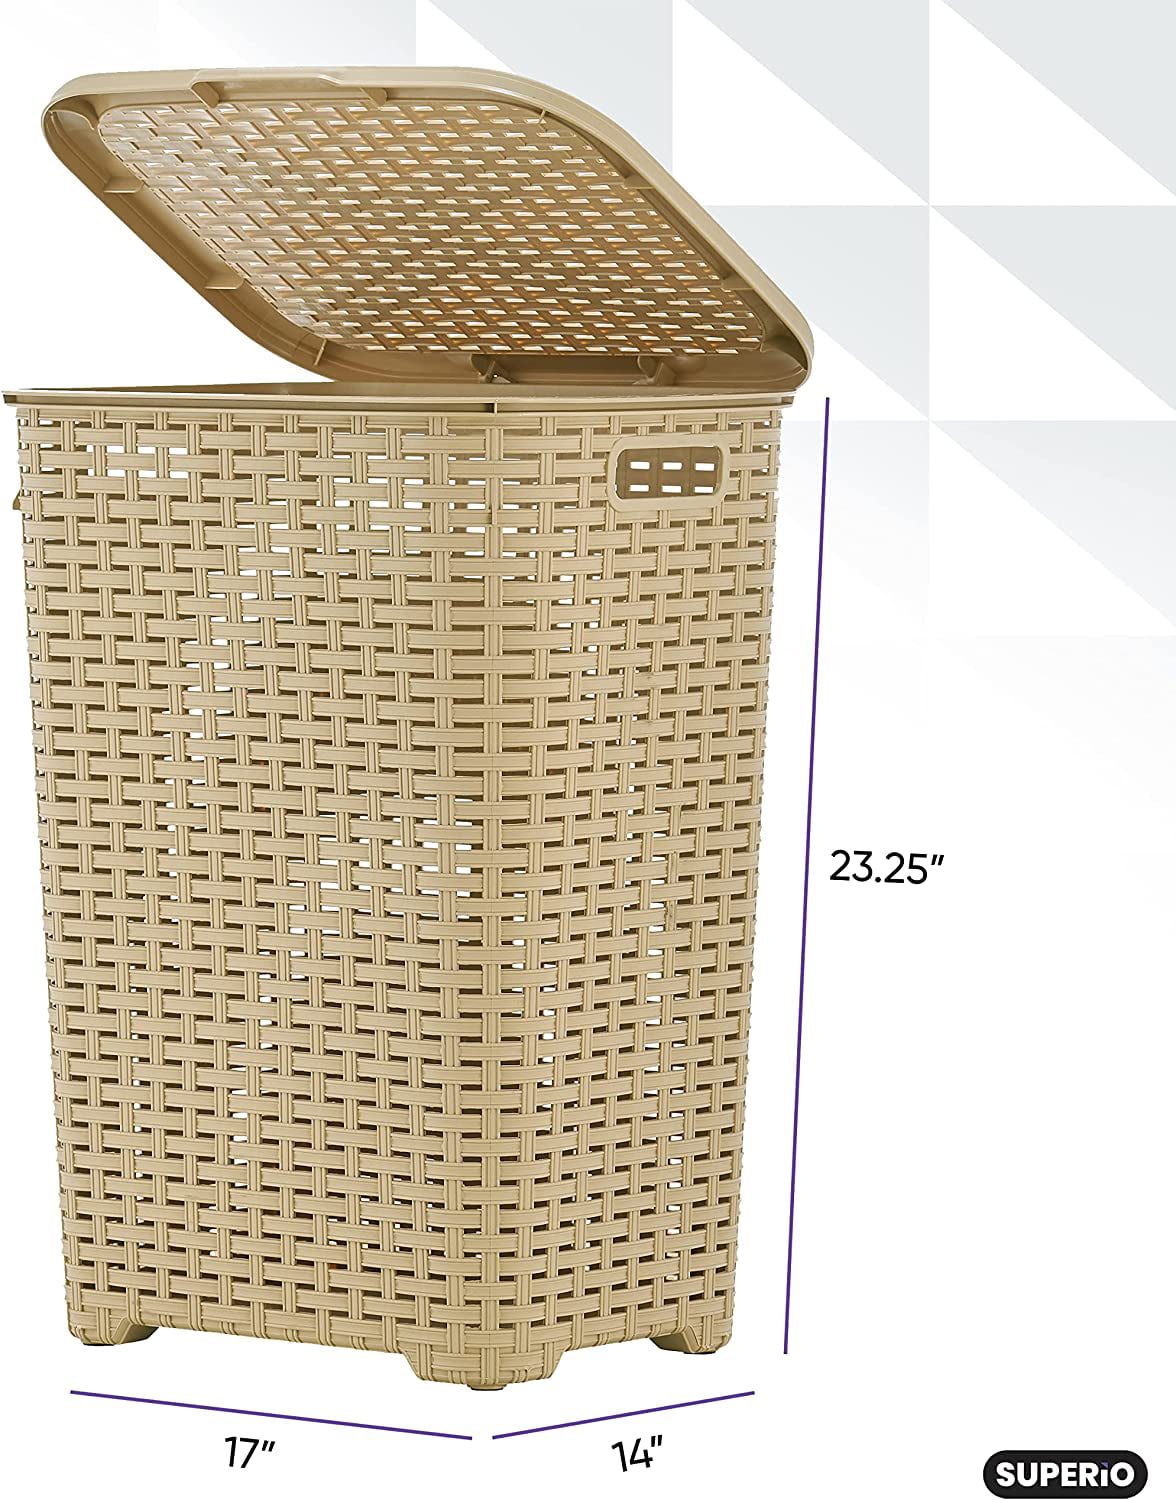 HOMEH Dirty Clothes Bucket, Plastic Imitation Rattan Laundry Basket with  Cover Used for Clothing Toy Storage (3 Colors) (Color : Beige)